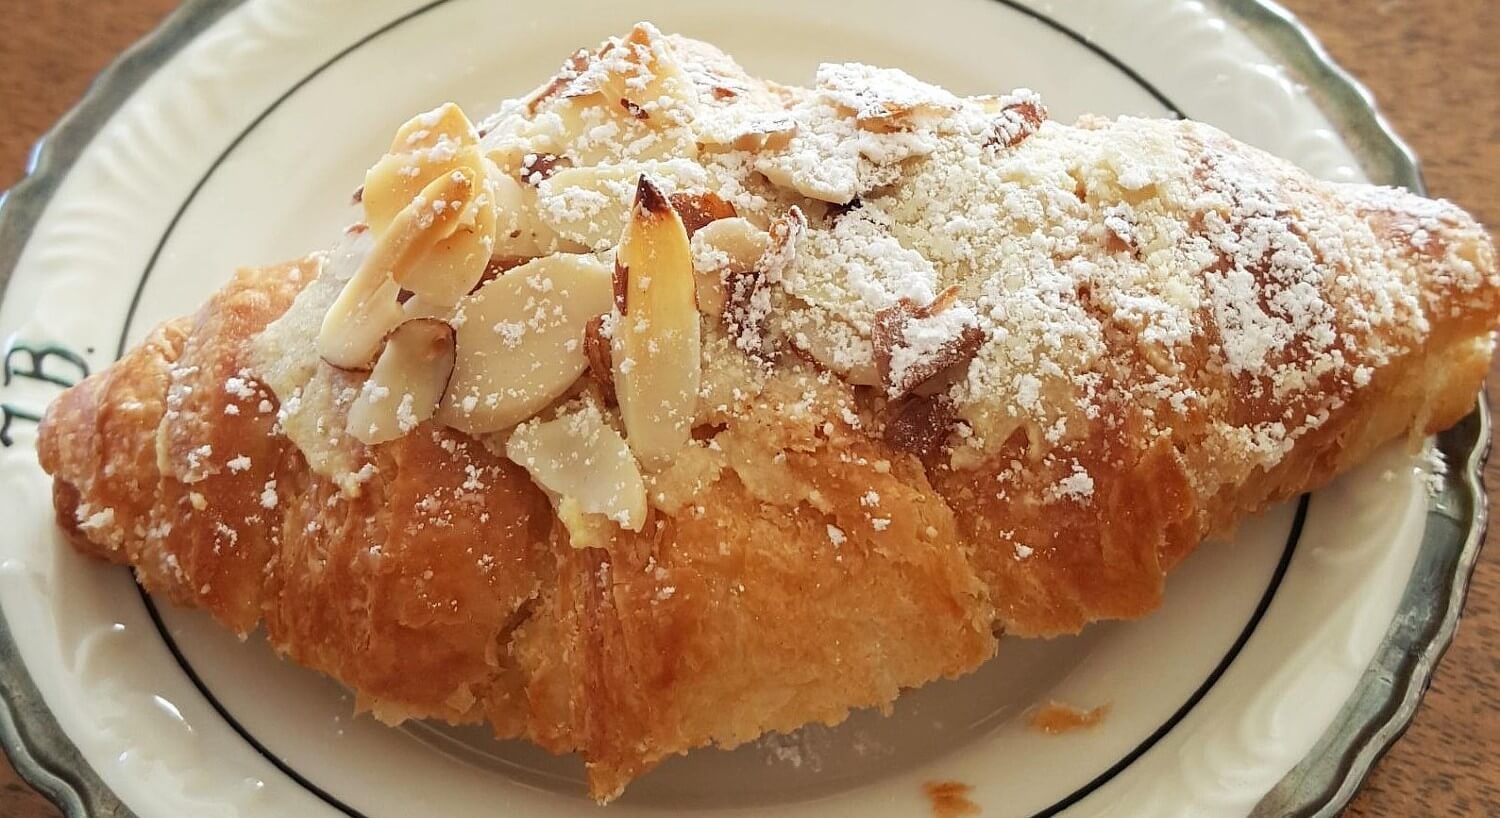 Golden brown almond croissant dusted with powdered sugar on a round white plate